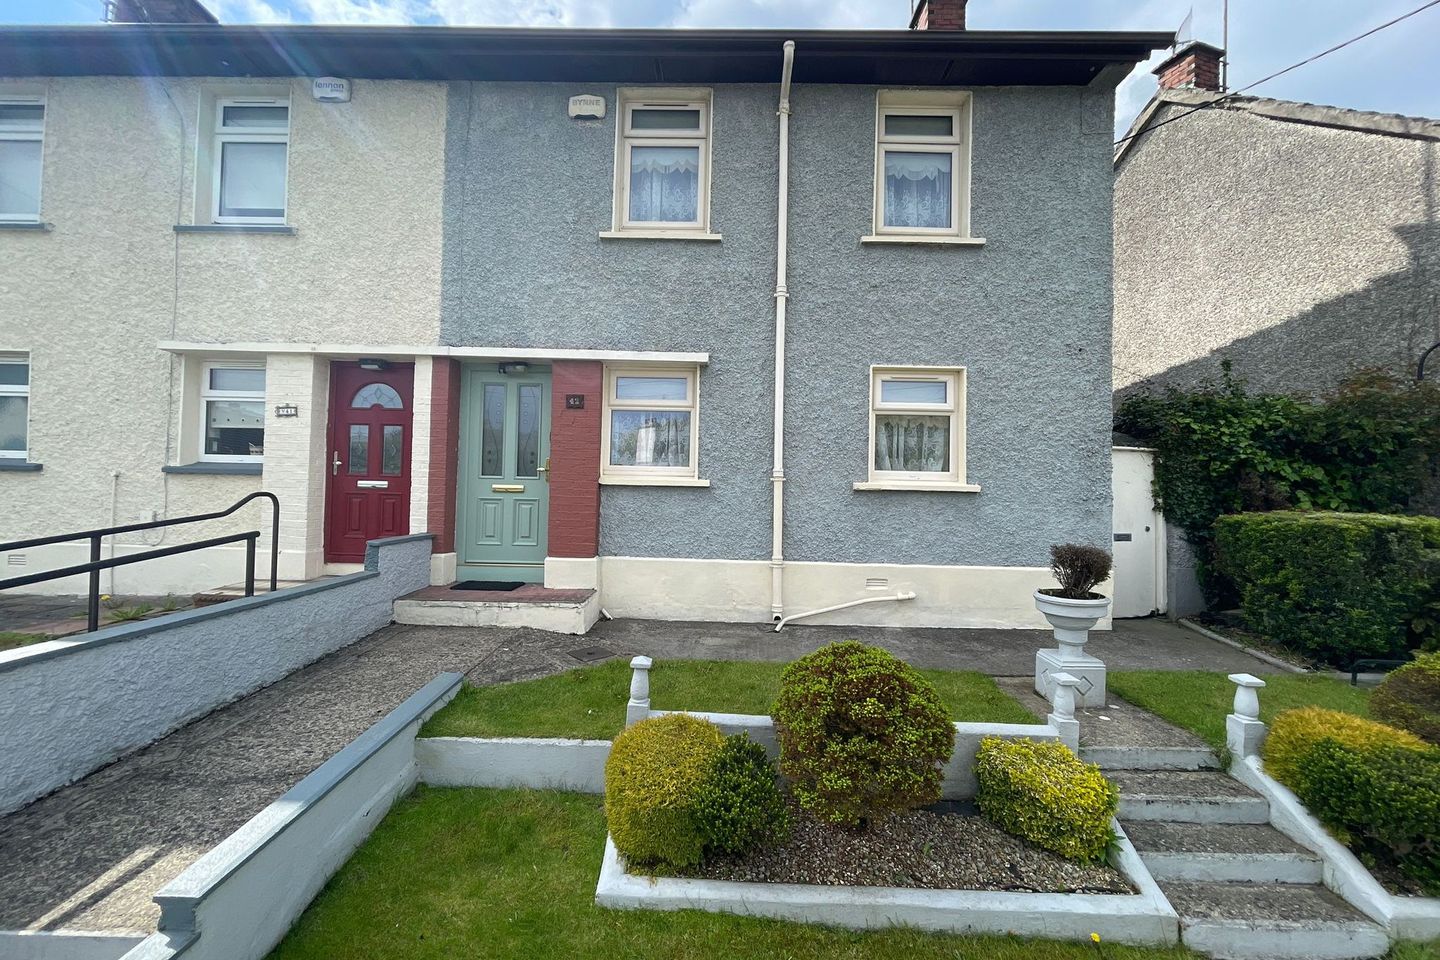 42 Ascal A Trí, Yellowbatter, Drogheda, Co. Louth